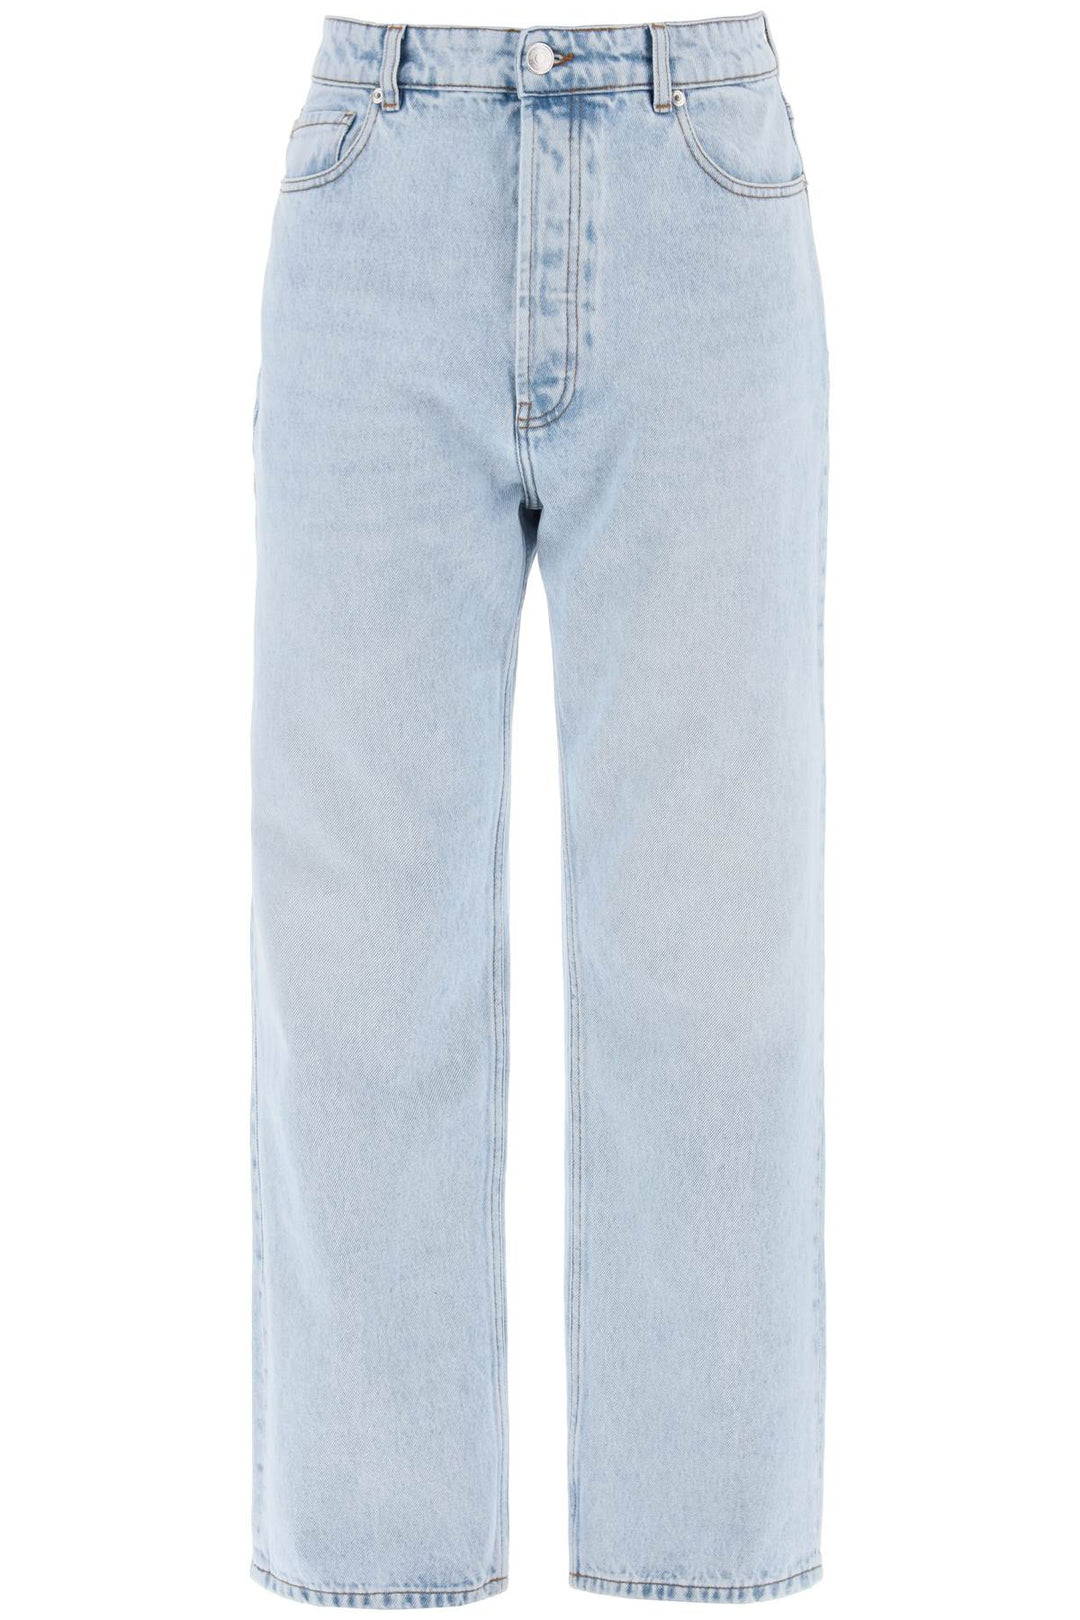 Ami paris wide leg denim jeans with a relaxed fit-0